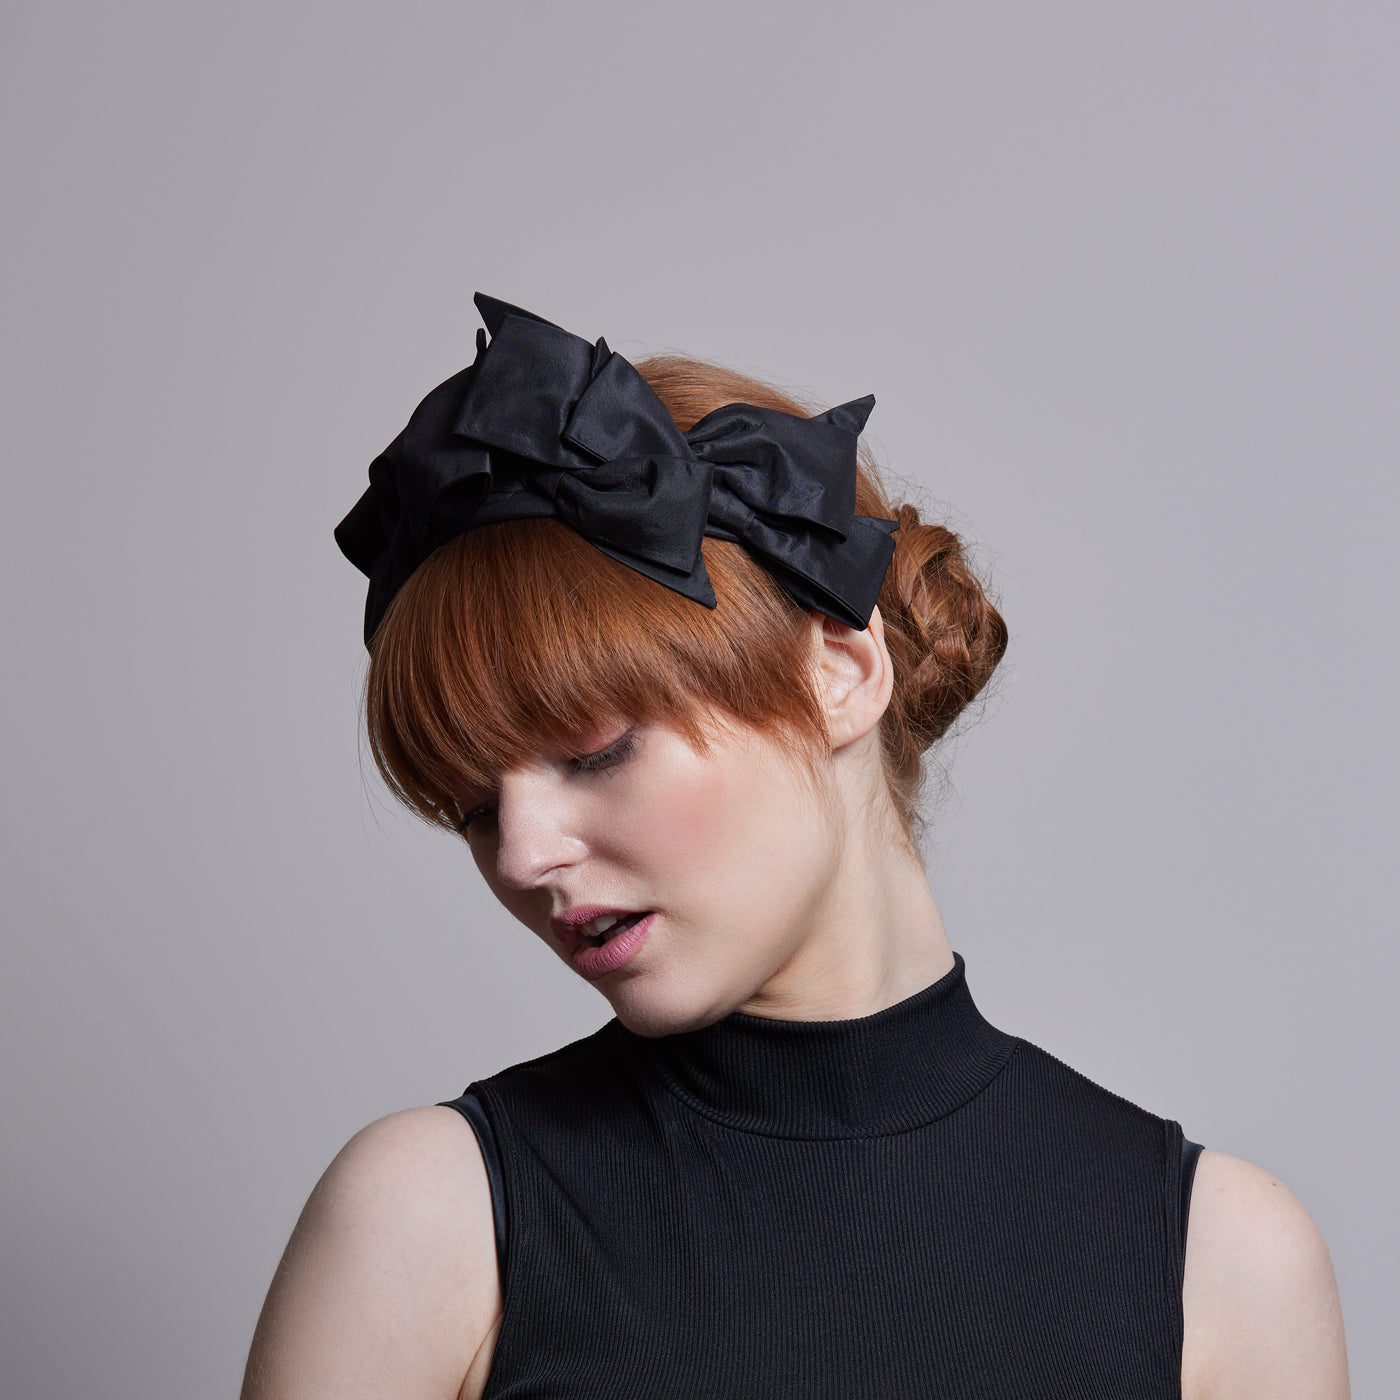 Woman with red hair wearing a black top and a black silk bow headband